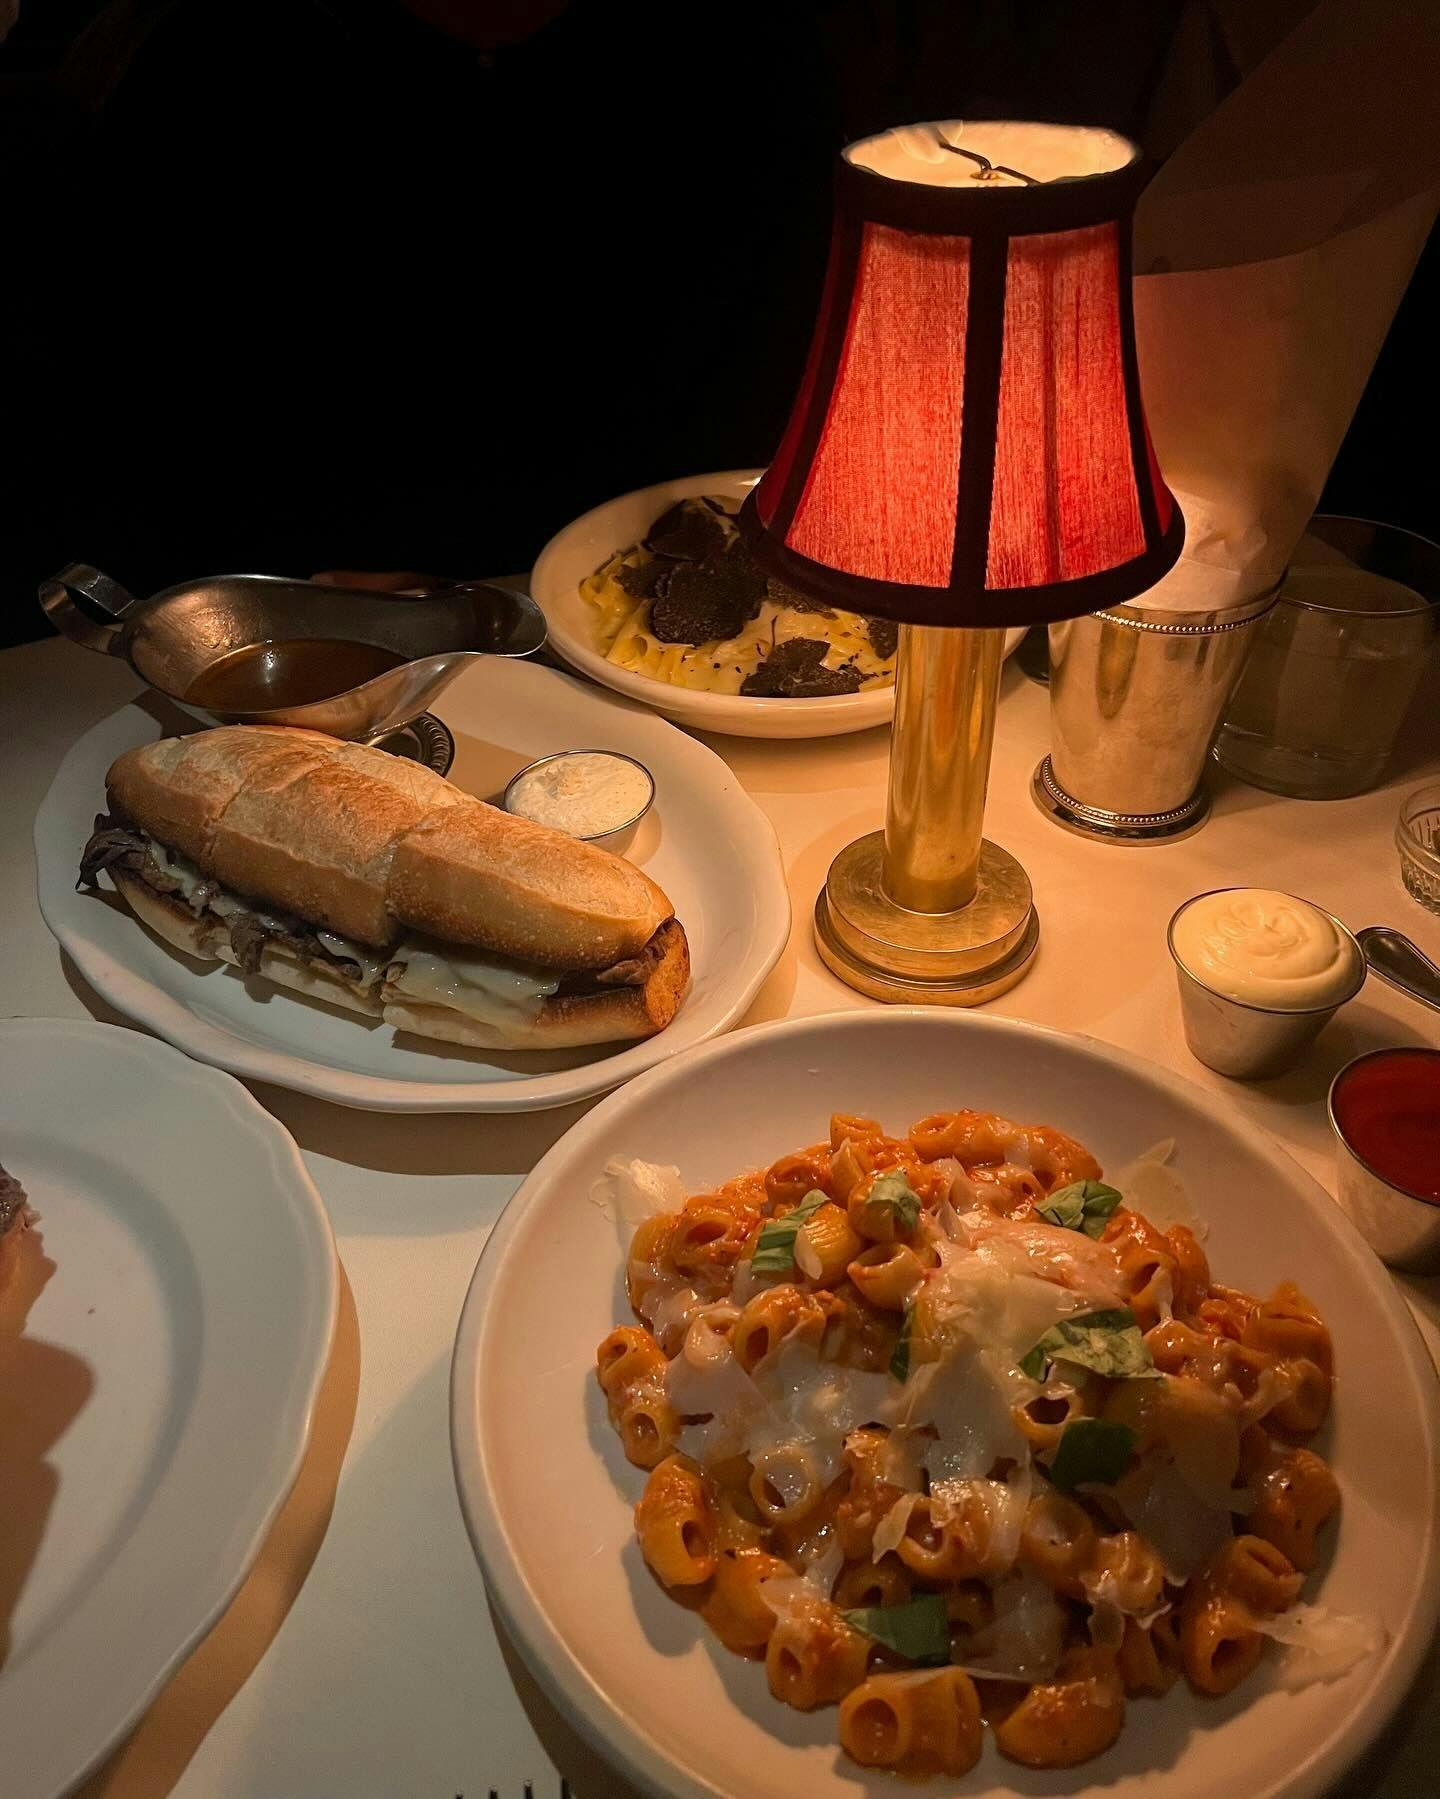 An intimate dining setup featuring a steak sandwich and a plate of creamy pasta under the soft glow of a table lamp, offering a cozy and inviting atmosphere as part of the unique dining experiences available through Booked in New York.